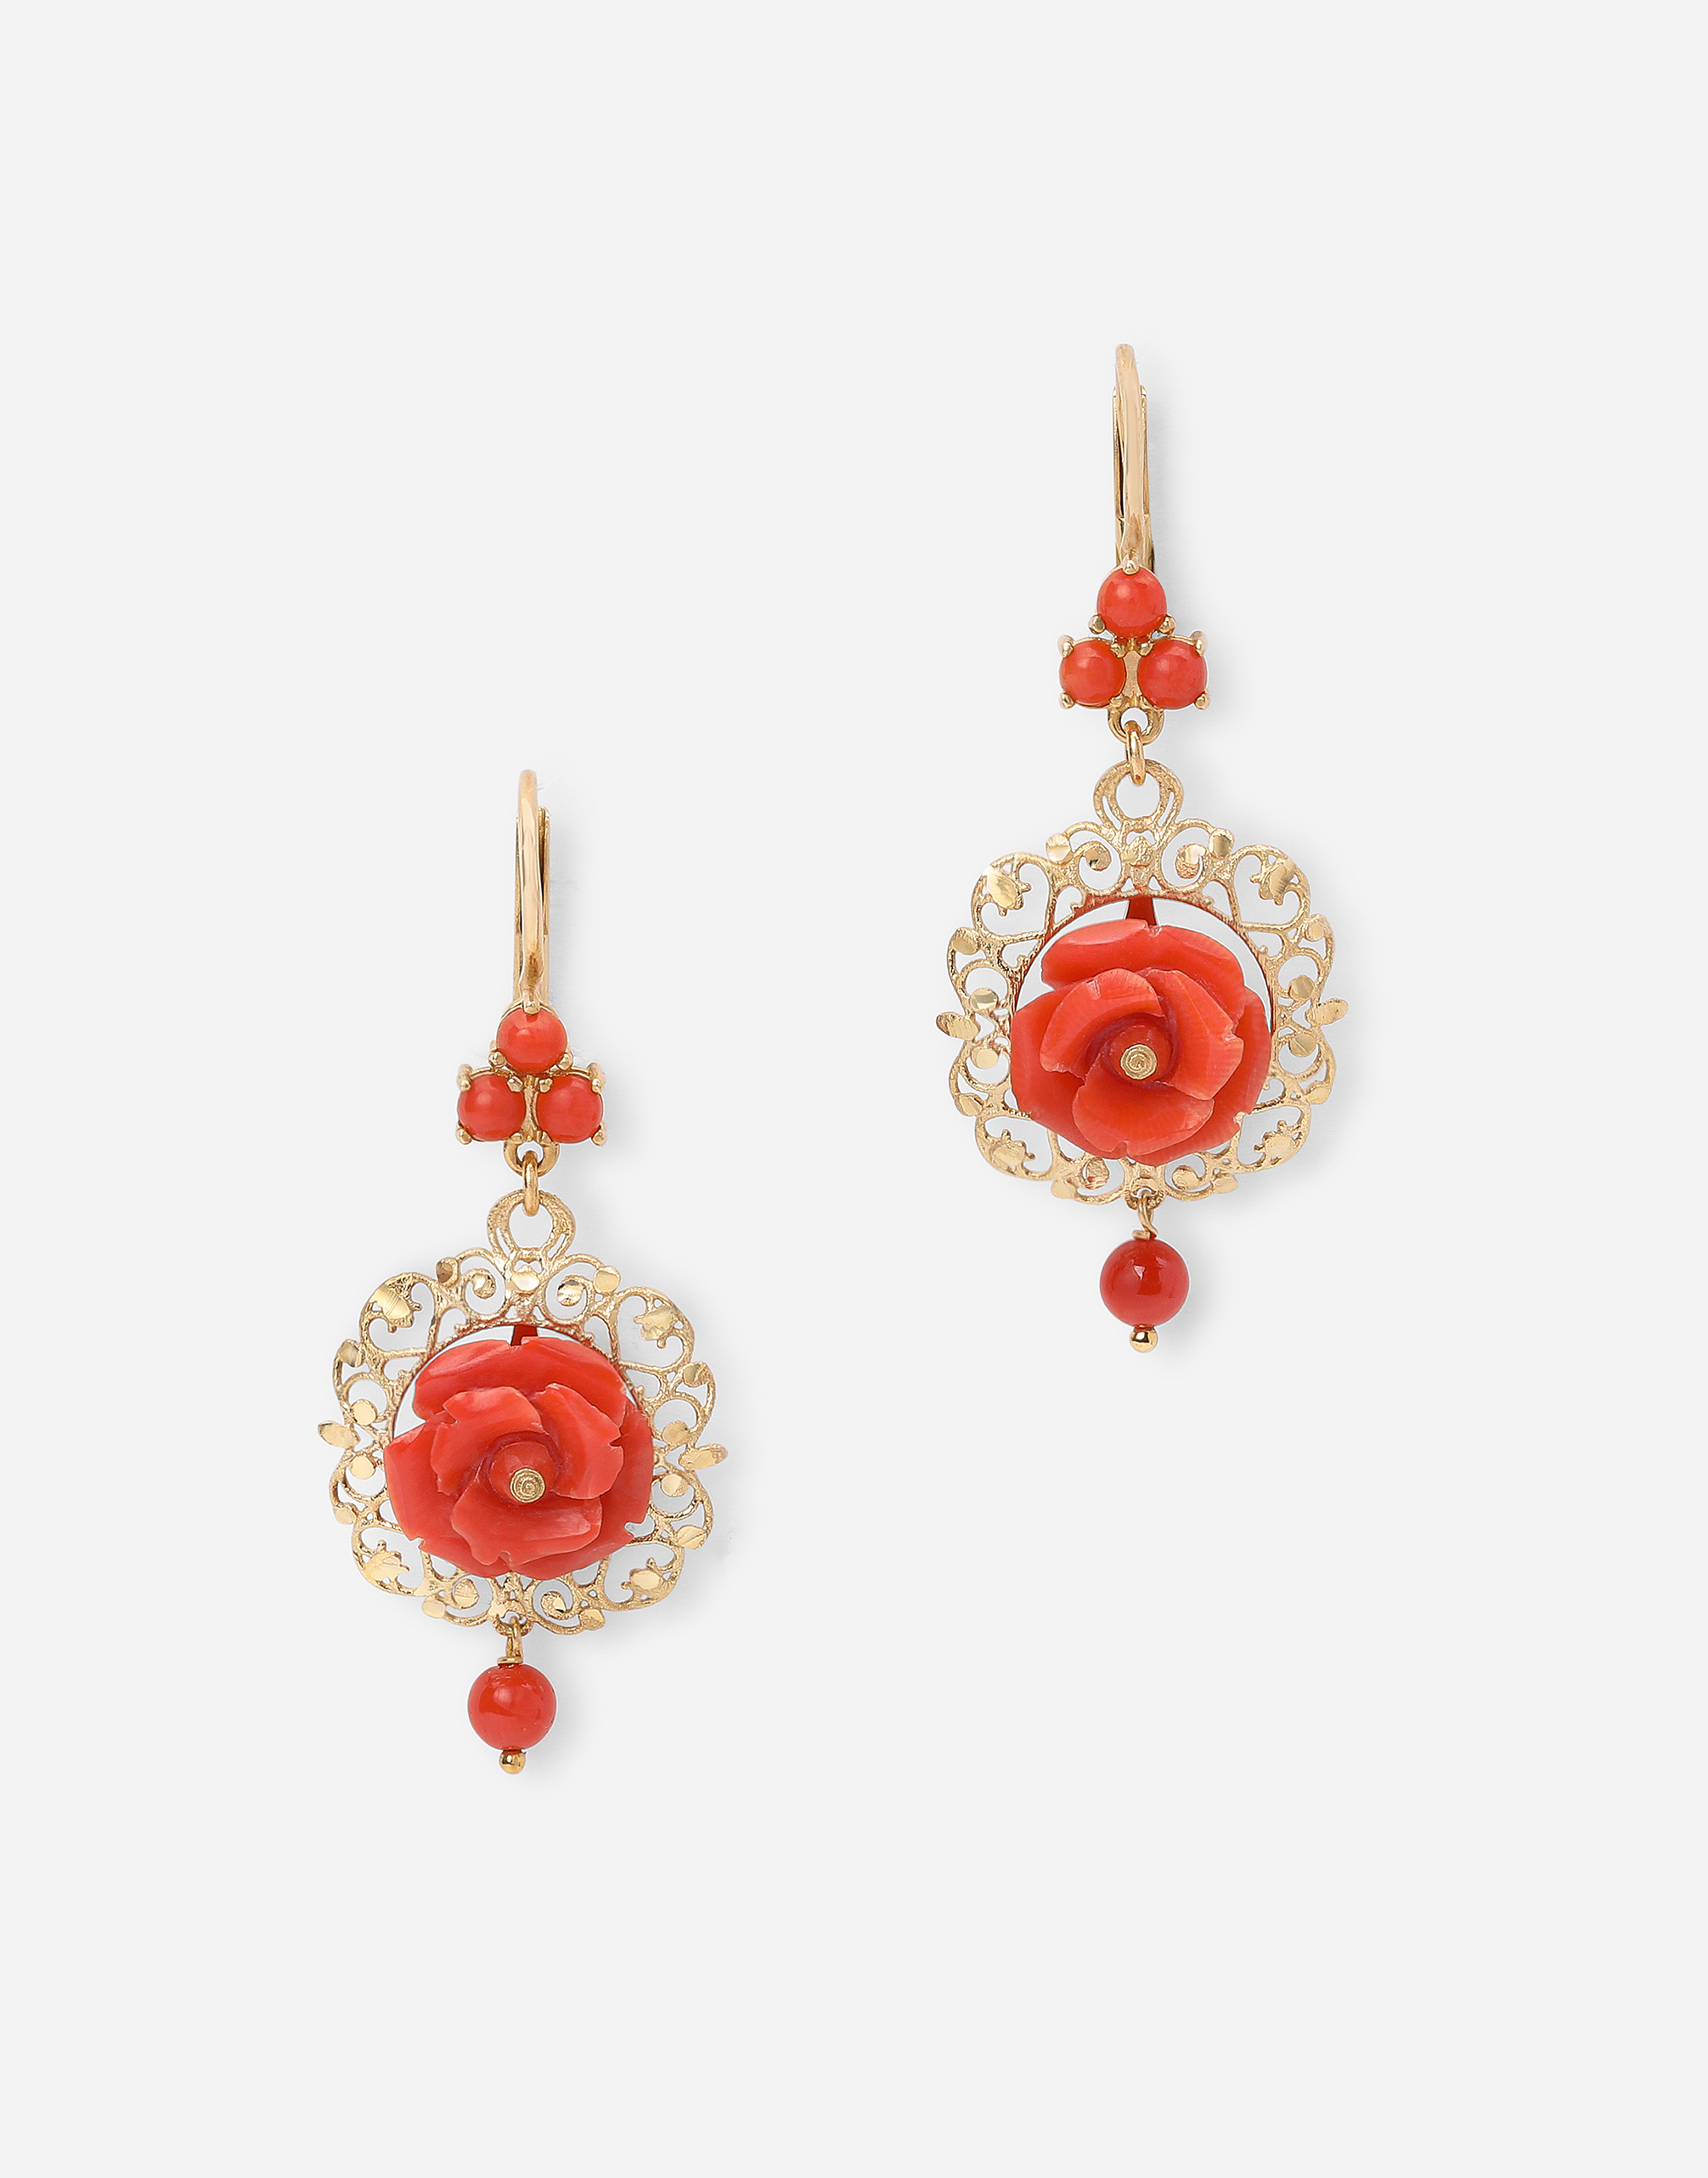 Coral leverback earrings in yellow 18kt gold with coral roses in Gold